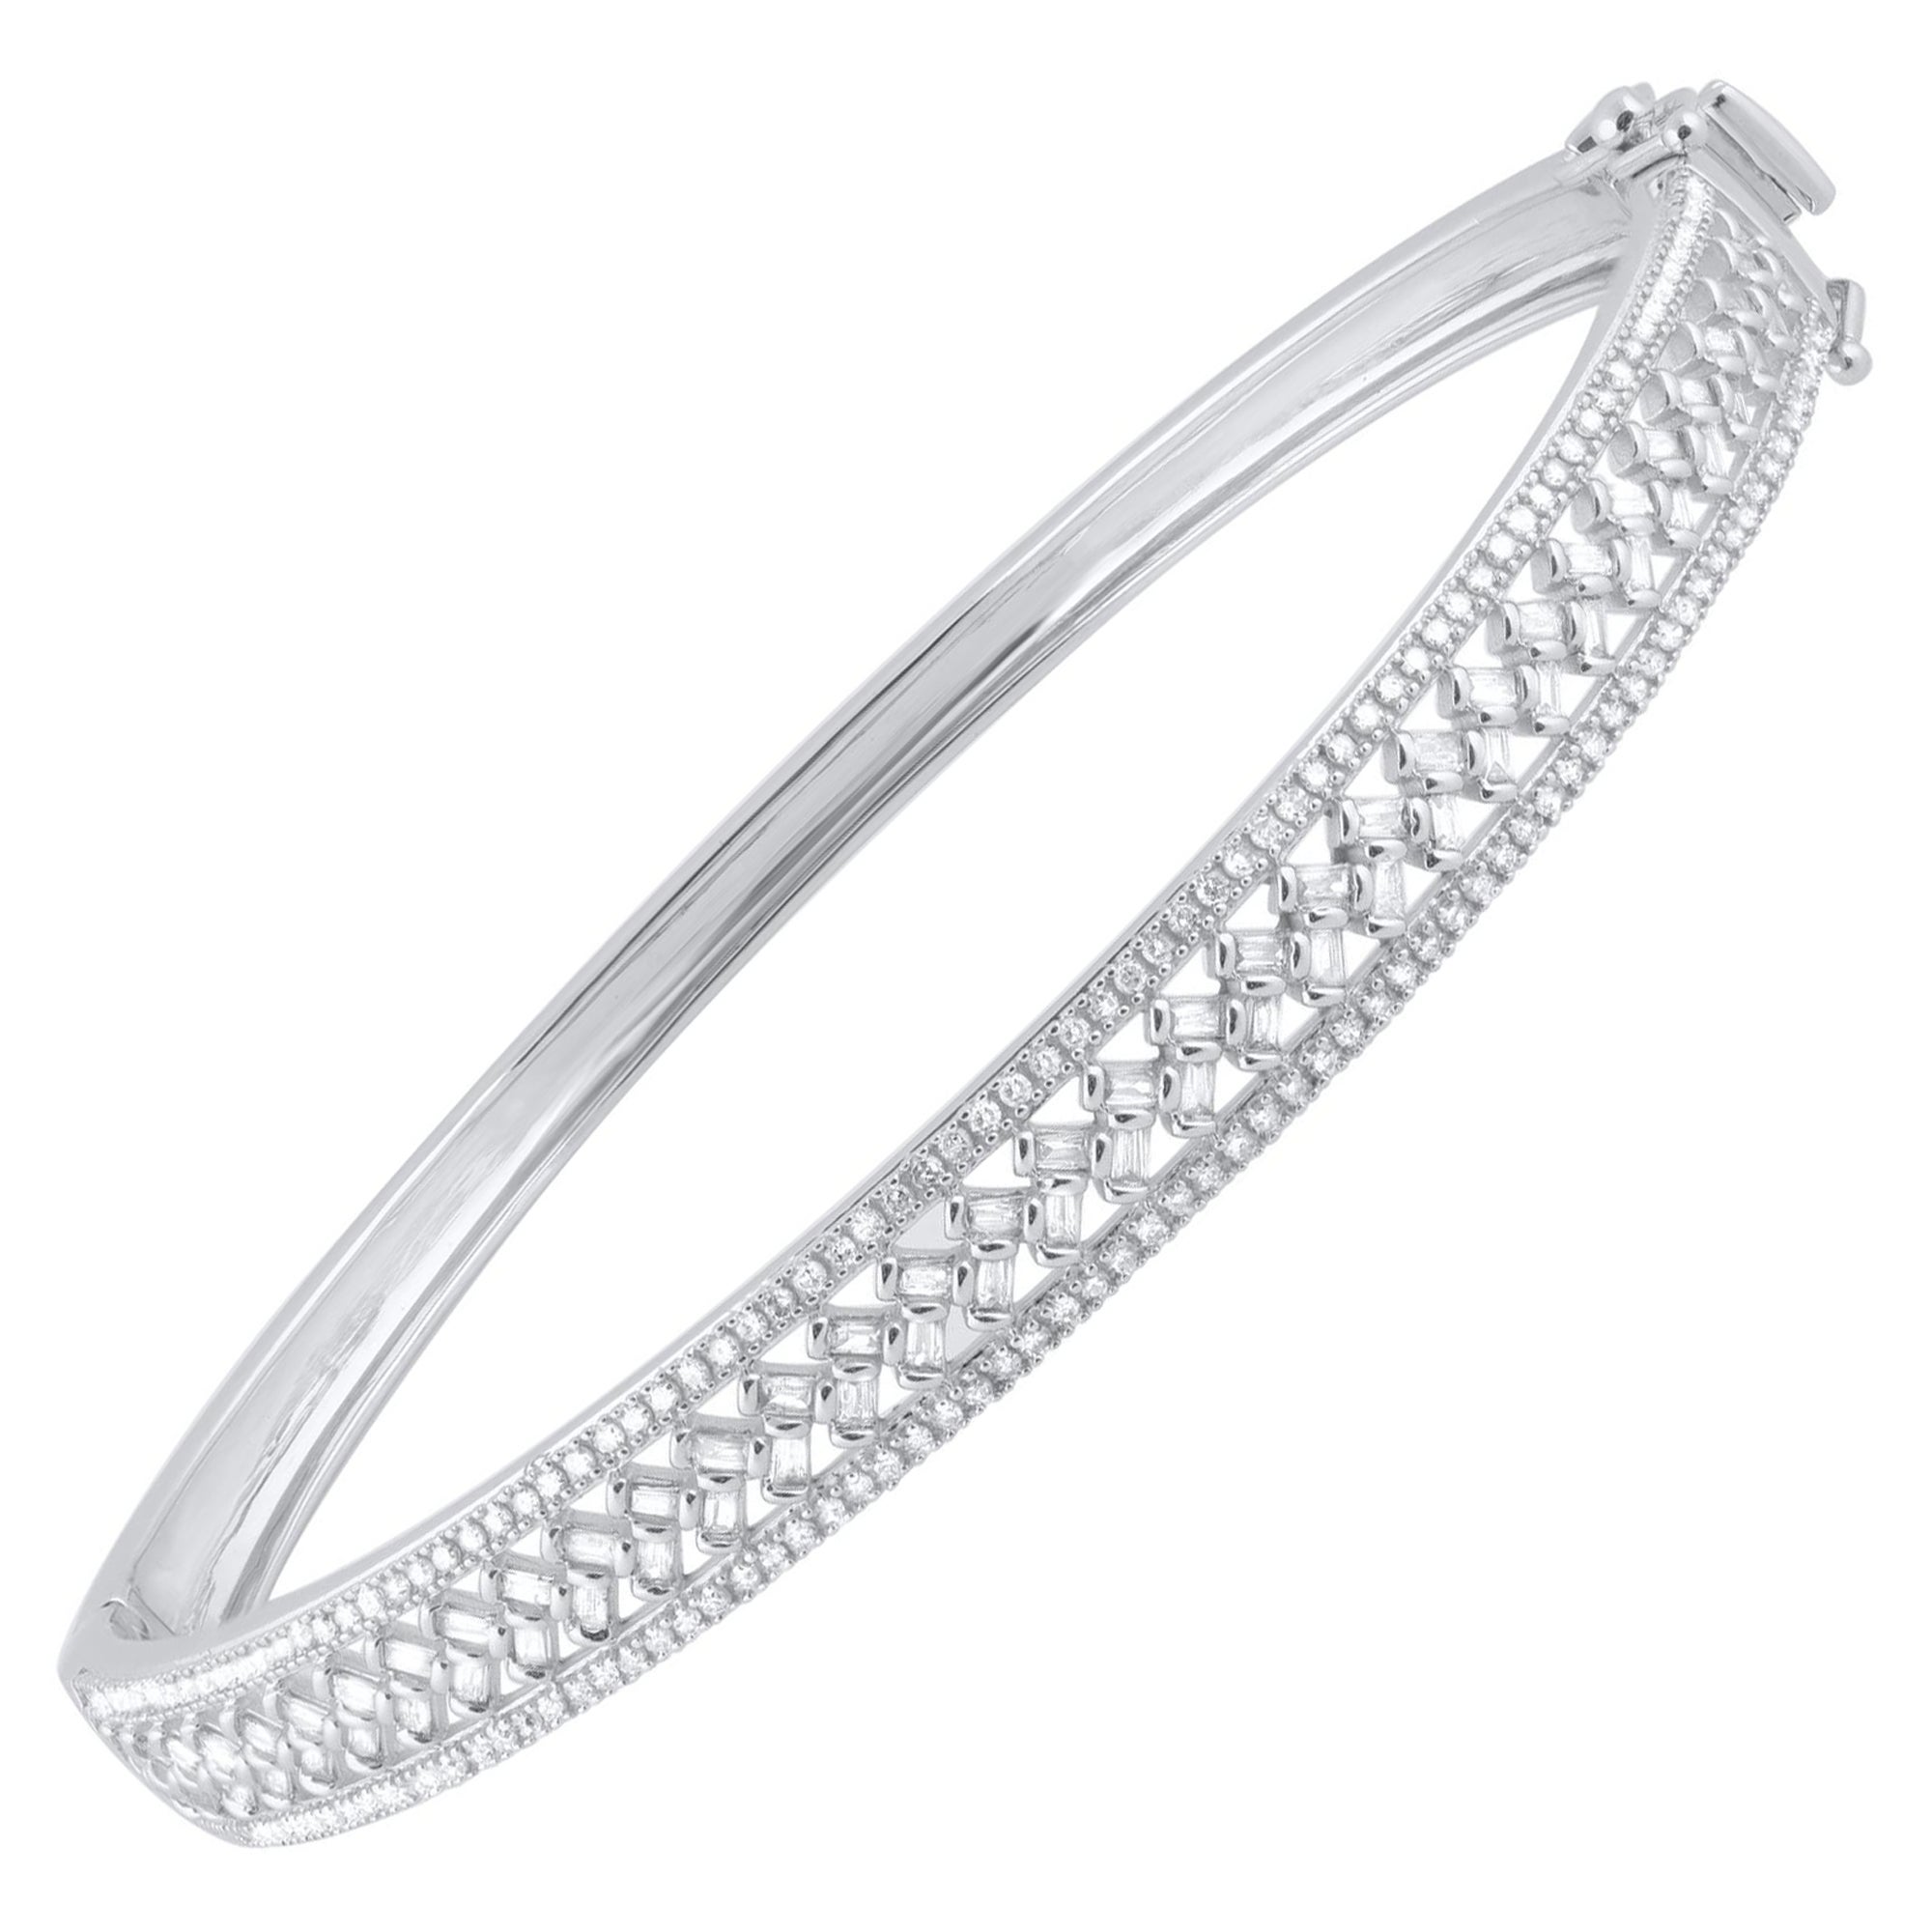 Classic and sophisticated, this diamond bangle bracelet pairs well with any attire.
This Shimmering bangle bracelet features 228 single cut & baguette natural diamonds in prong & channel setting and crafted in 14 kt white gold. Diamonds are graded